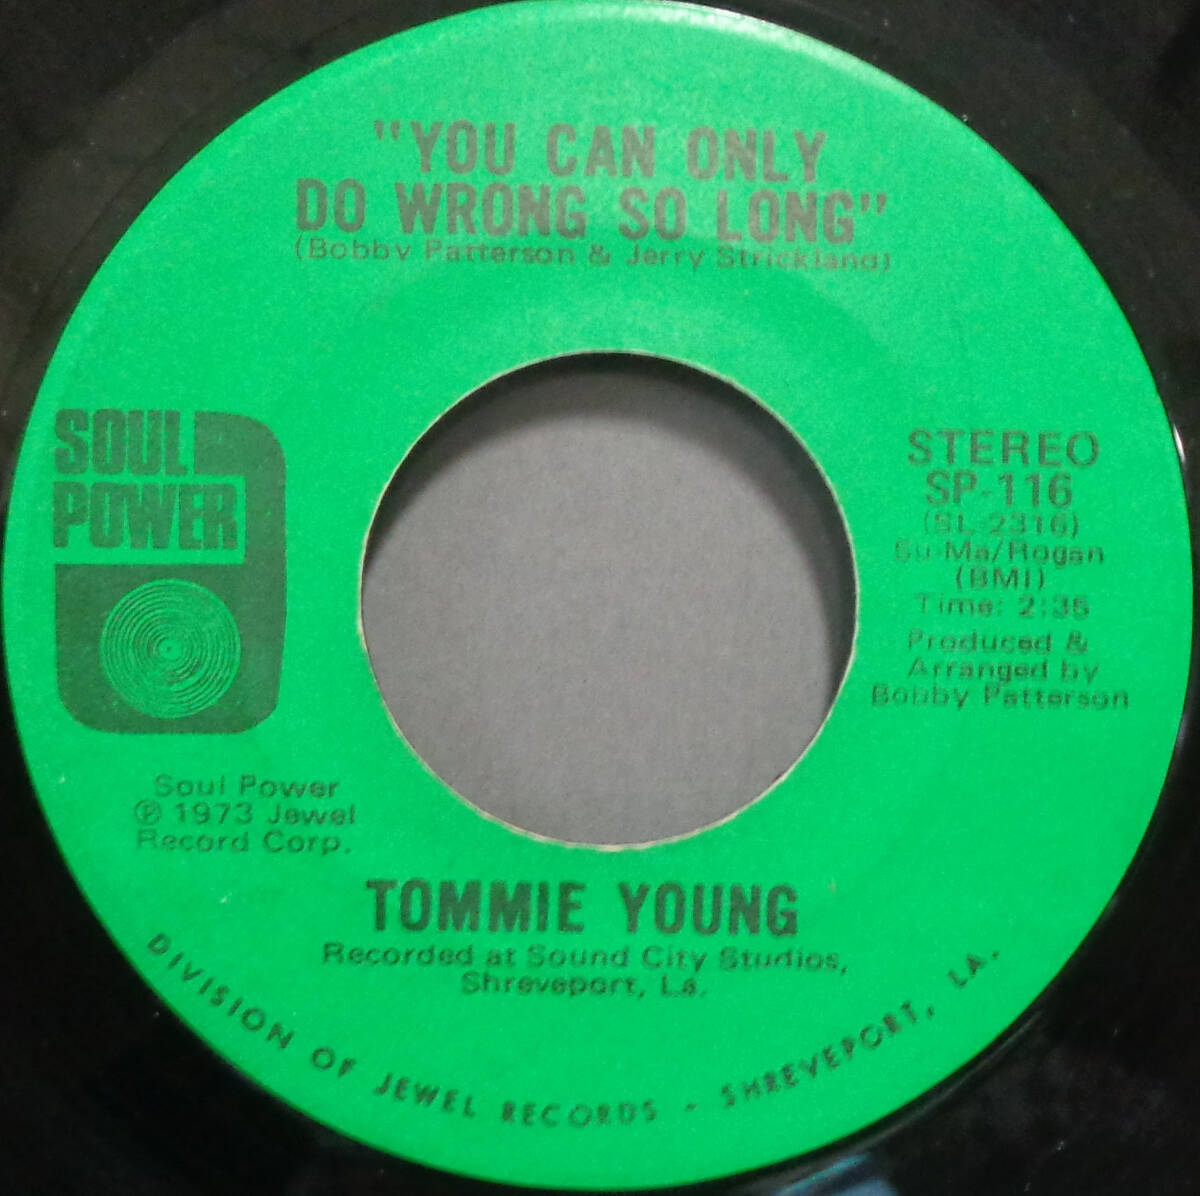 【SOUL 45】TOMMIE YOUNG - YOU CAN ONLY DO WRONG SO LONG / YOU BROUGHT IT ALL ON YOURSELF (s240403030) の画像1